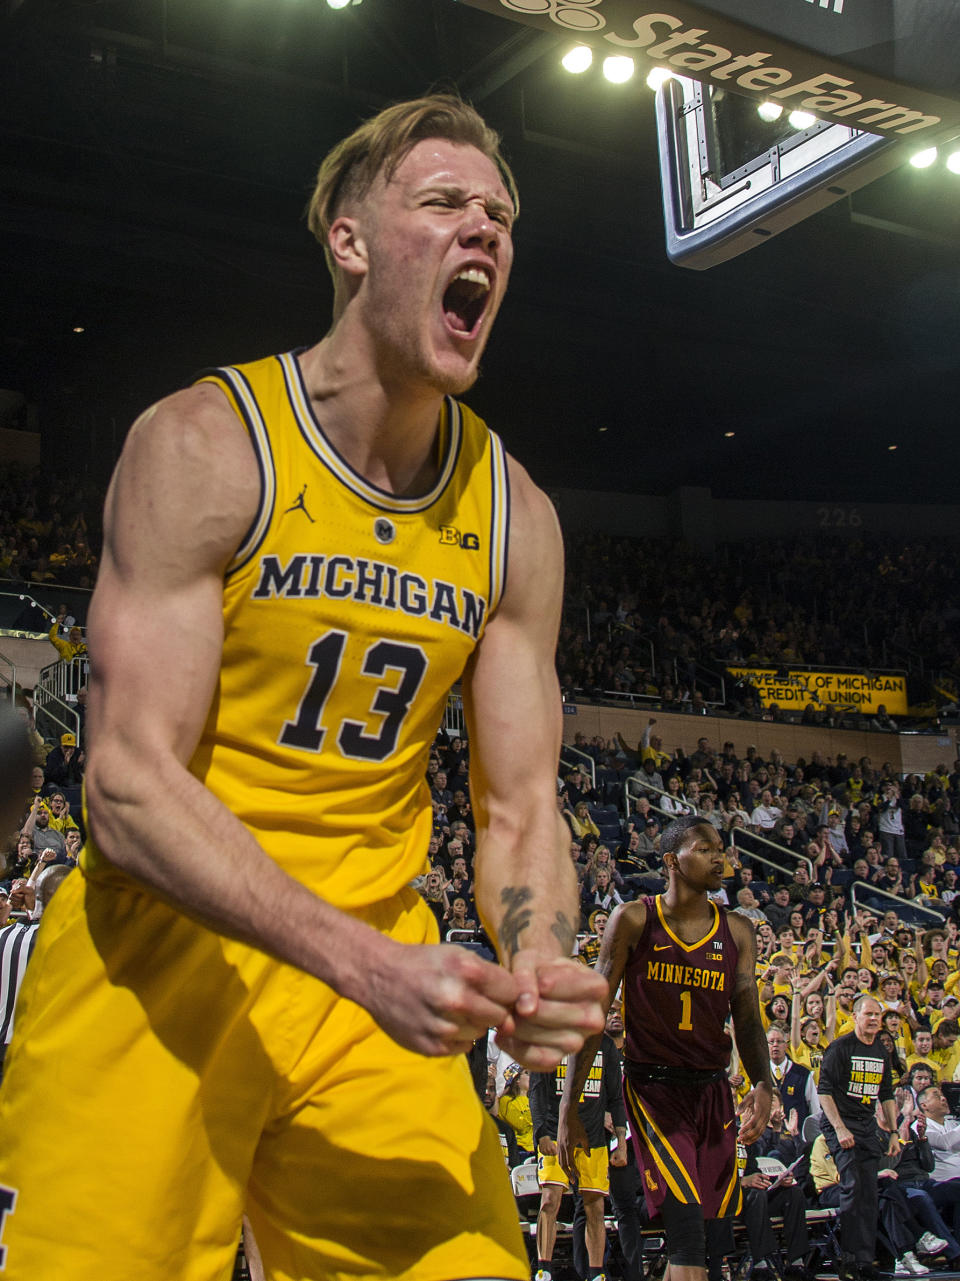 Michigan forward Ignas Brazdeikis (13) reacts to earning a free throw after making a basket in the second half of an NCAA college basketball game against Minnesota at Crisler Center in Ann Arbor, Mich., Tuesday, Jan. 22, 2019. Michigan won 59-57. (AP Photo/Tony Ding)